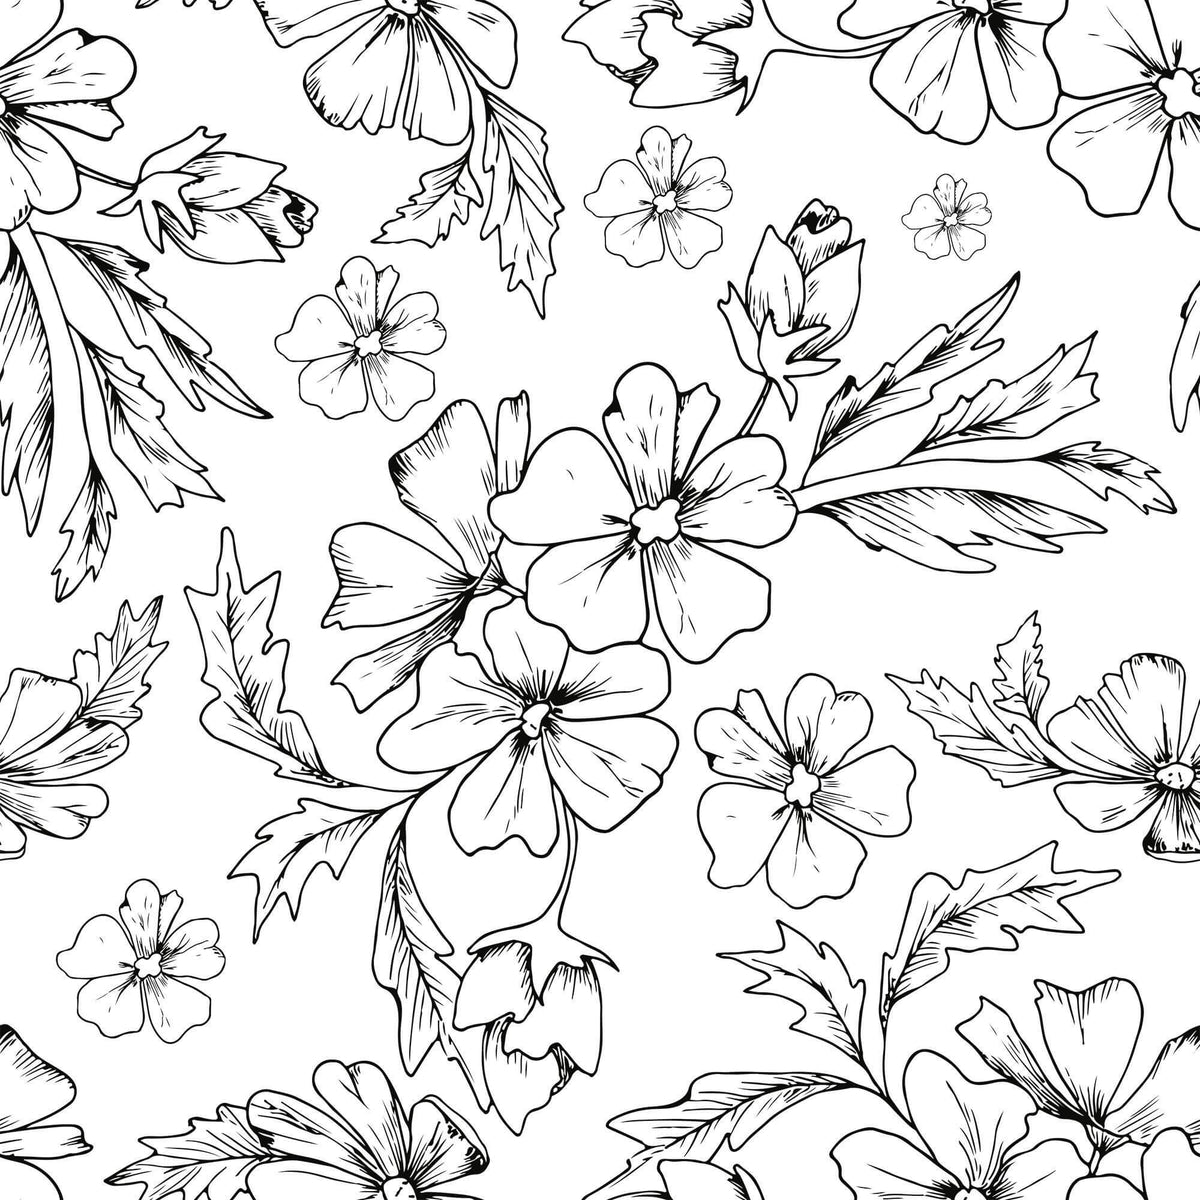 Black & White Textured Floral Wallpaper | Walls By Me